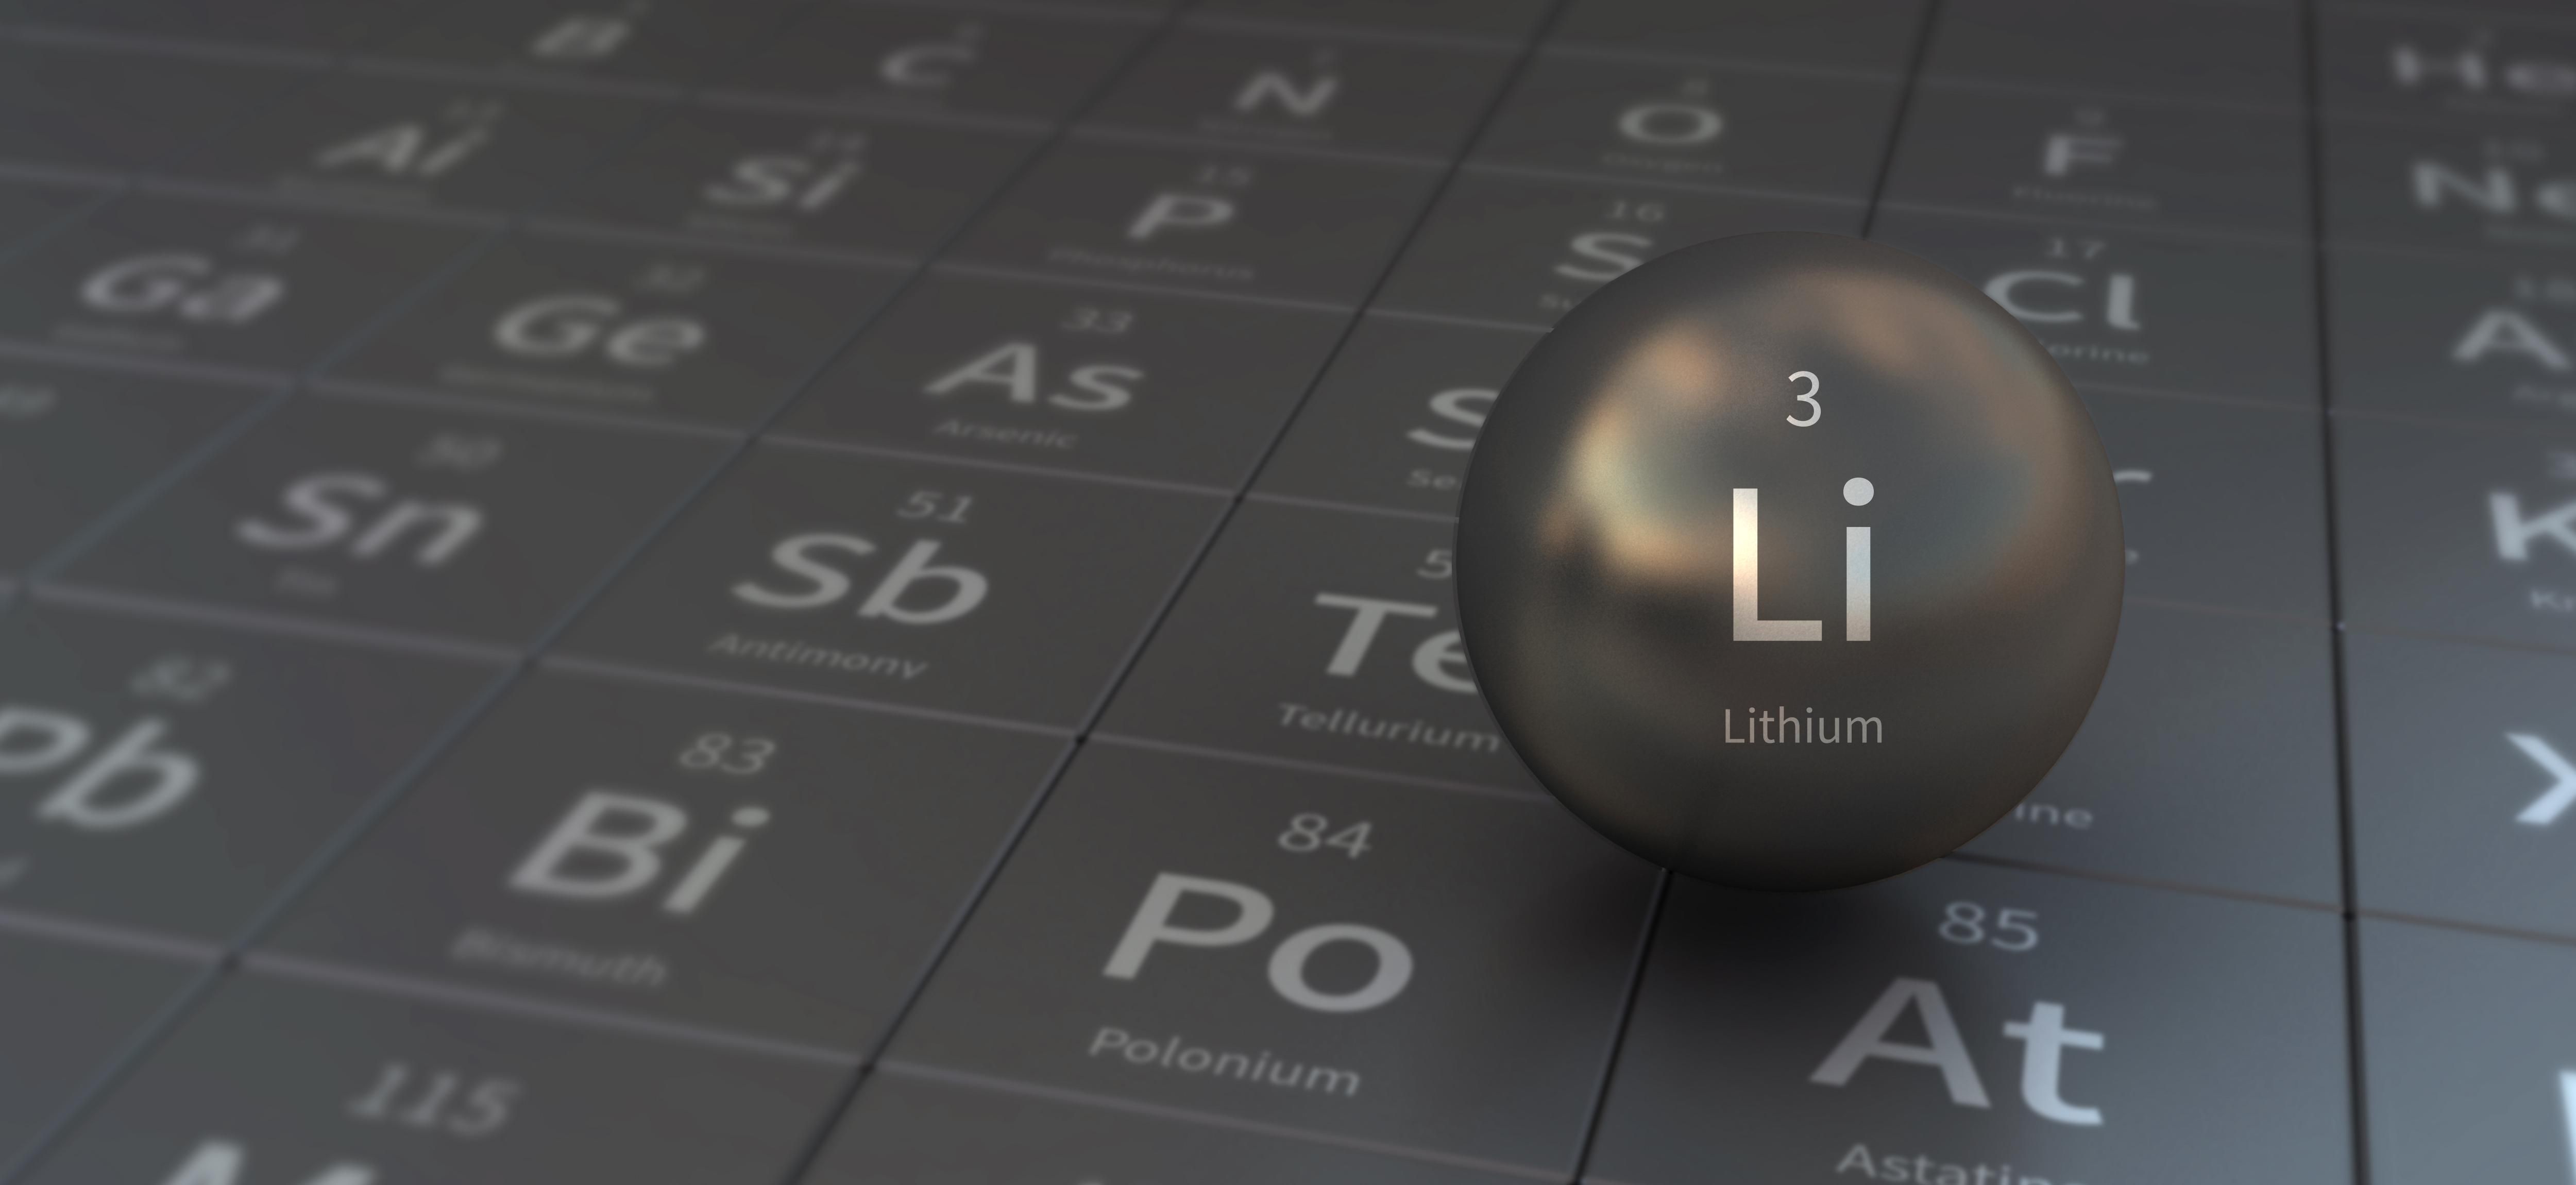 a round metal ball with the periodic table information for lithium sitting atop a periodic table of elements